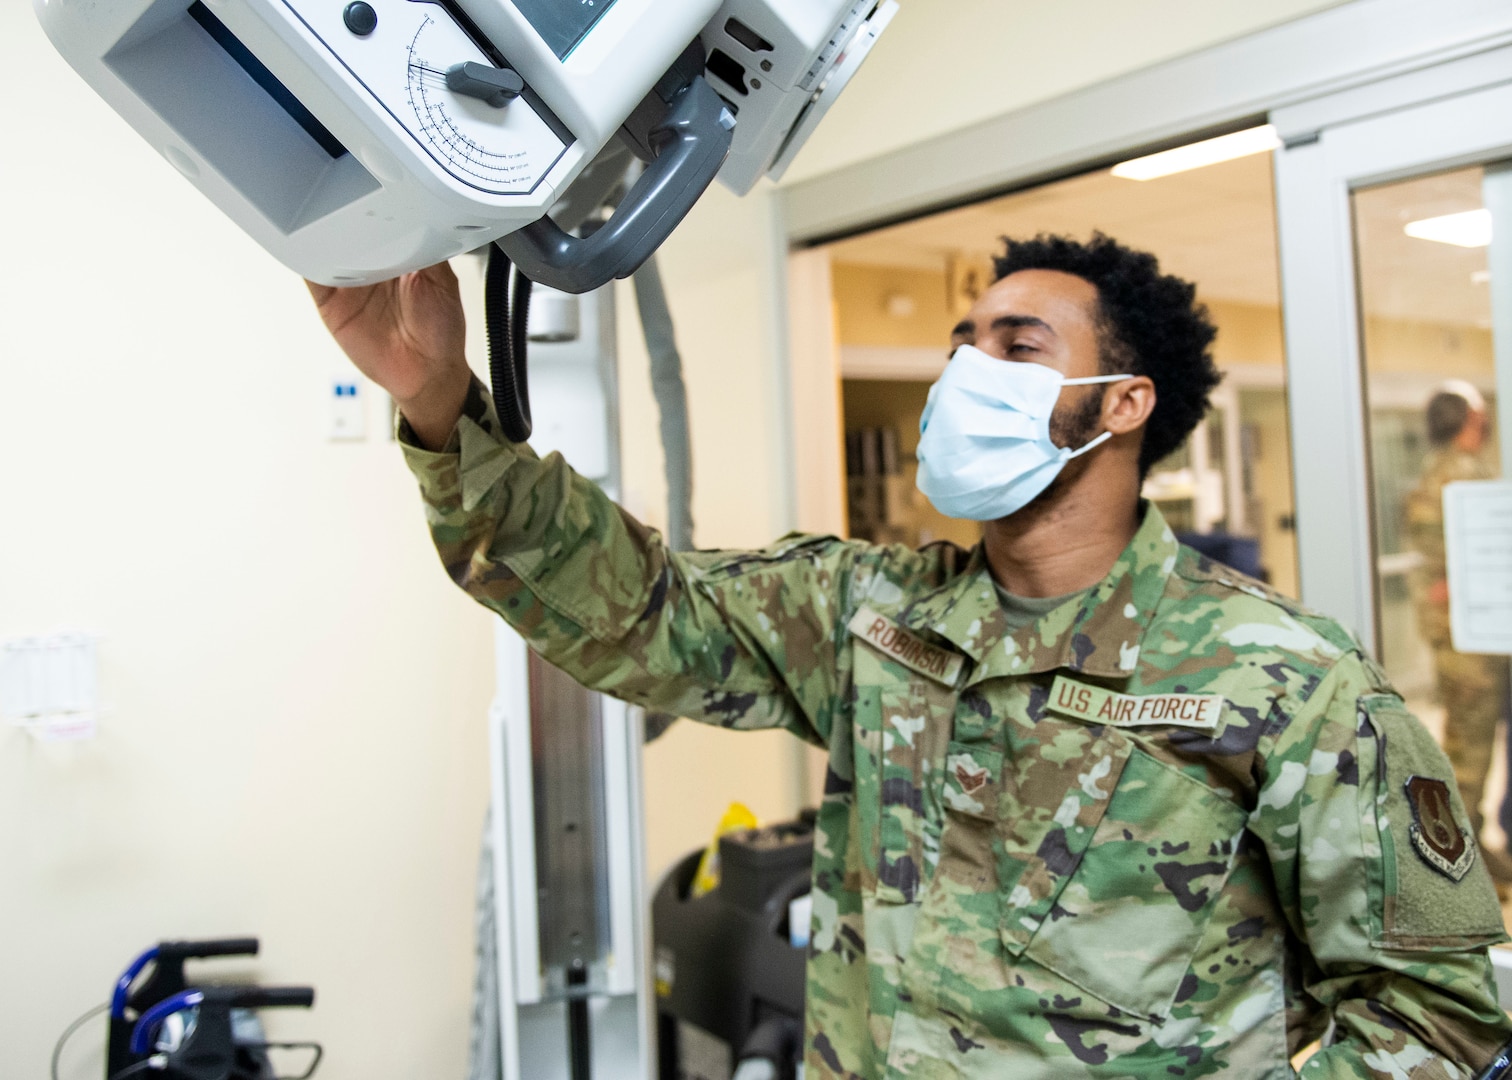 U.S. Air Force Senior Airman Jikhail Robinson, a radiologic technologist with the 88th Medical Group, takes a portable chest x-ray of a patient inside the emergency room of the Wright-Patterson Air Force Base, Ohio Medical Center, April, 28, 2021. The medical center is open 24 hours a day with medical personnel standing by to treat anyone that comes through their door. (U.S. Air Force photo by Wesley Farnsworth)